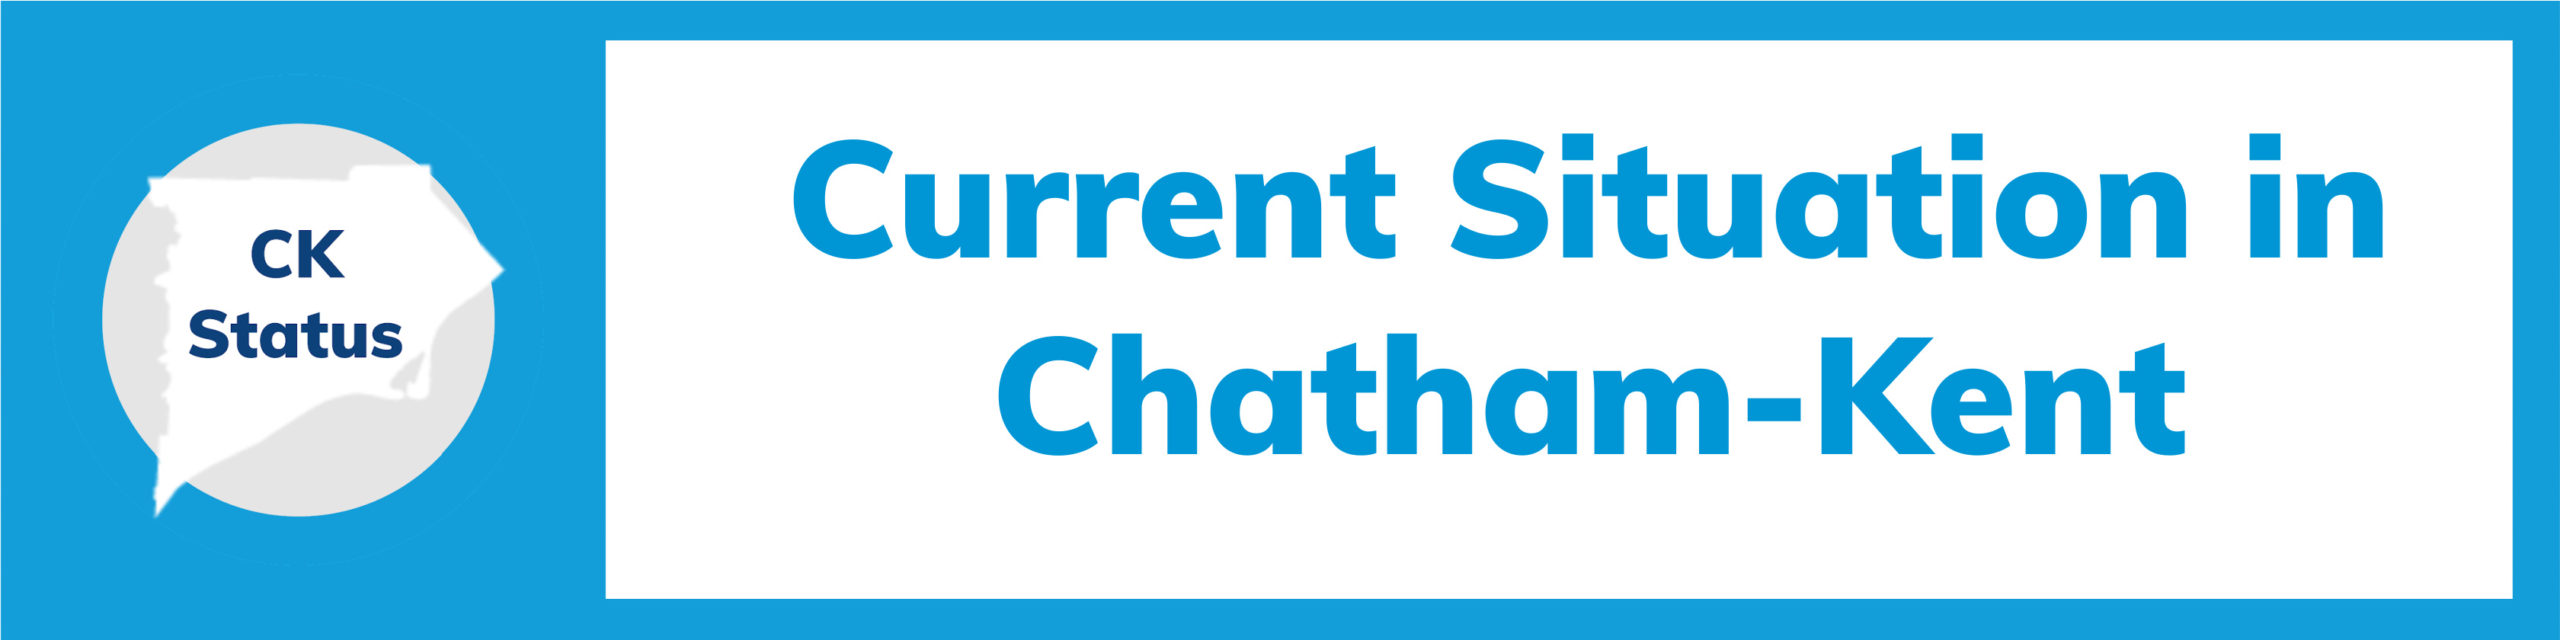 CK Status-Current Situation in Chatham-Kent